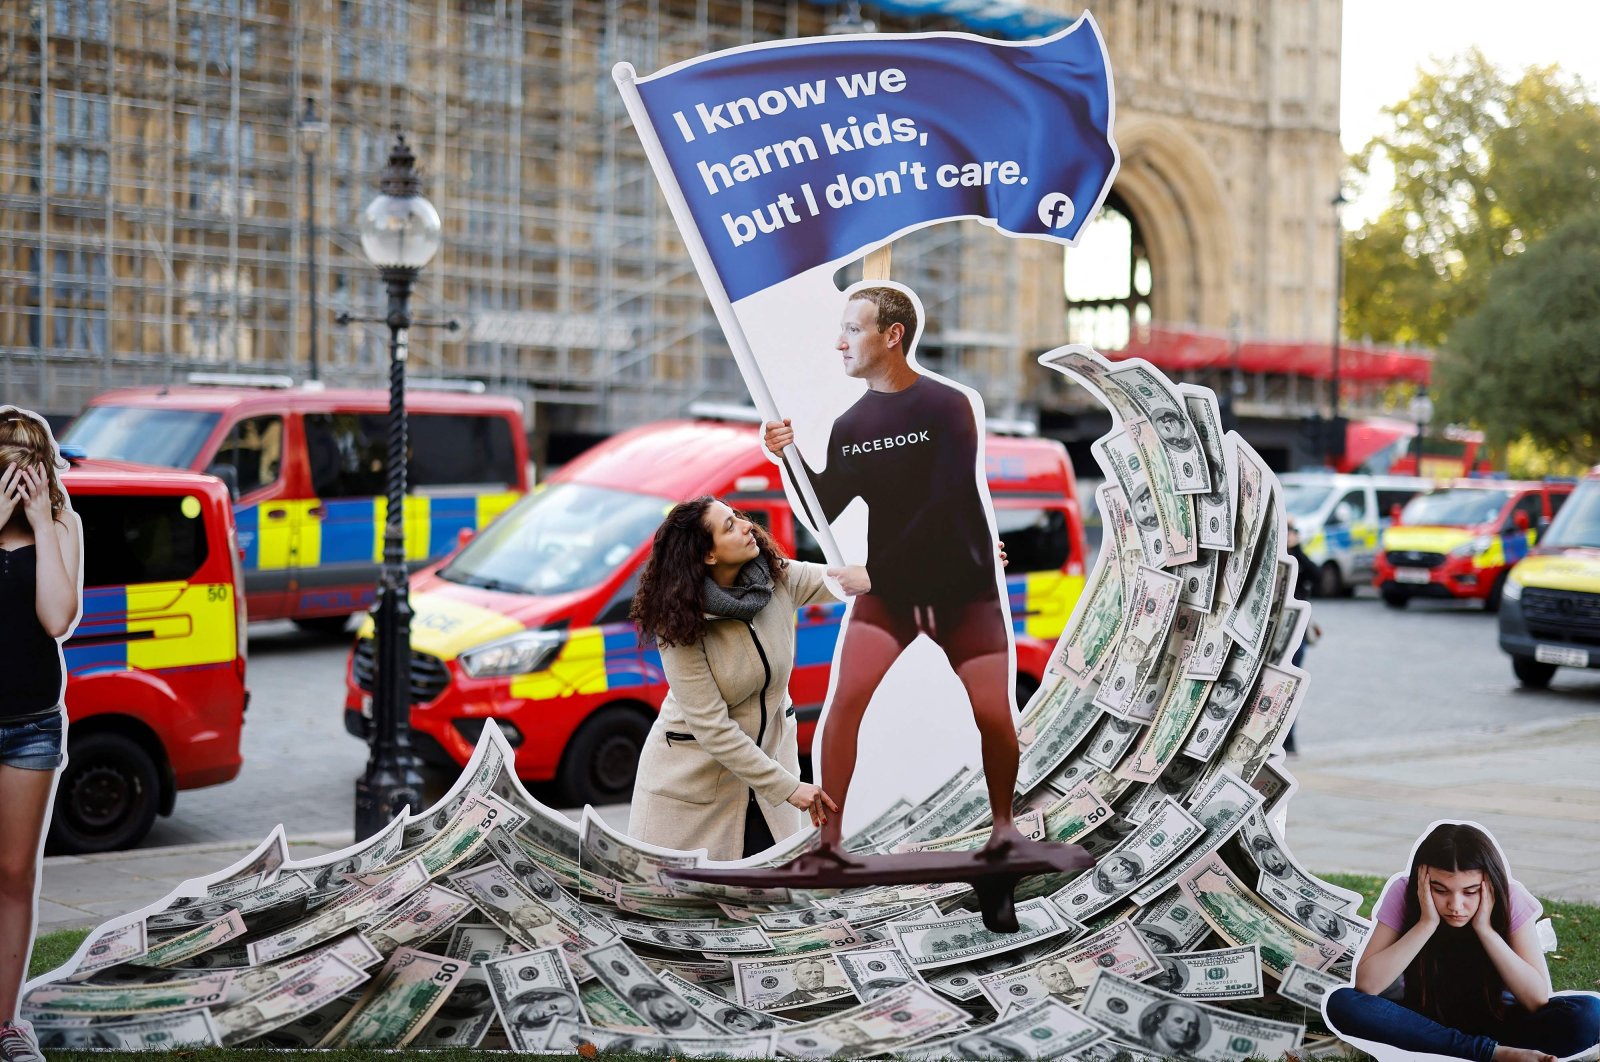 A demonstrator poses with an installation depicting Facebook founder Mark Zuckerberg surfing on a wave of cash and surrounded by distressed teenagers, during a protest opposite the Houses of Parliament in central London, U.K., Oct. 25, 2021. (AFP Photo)